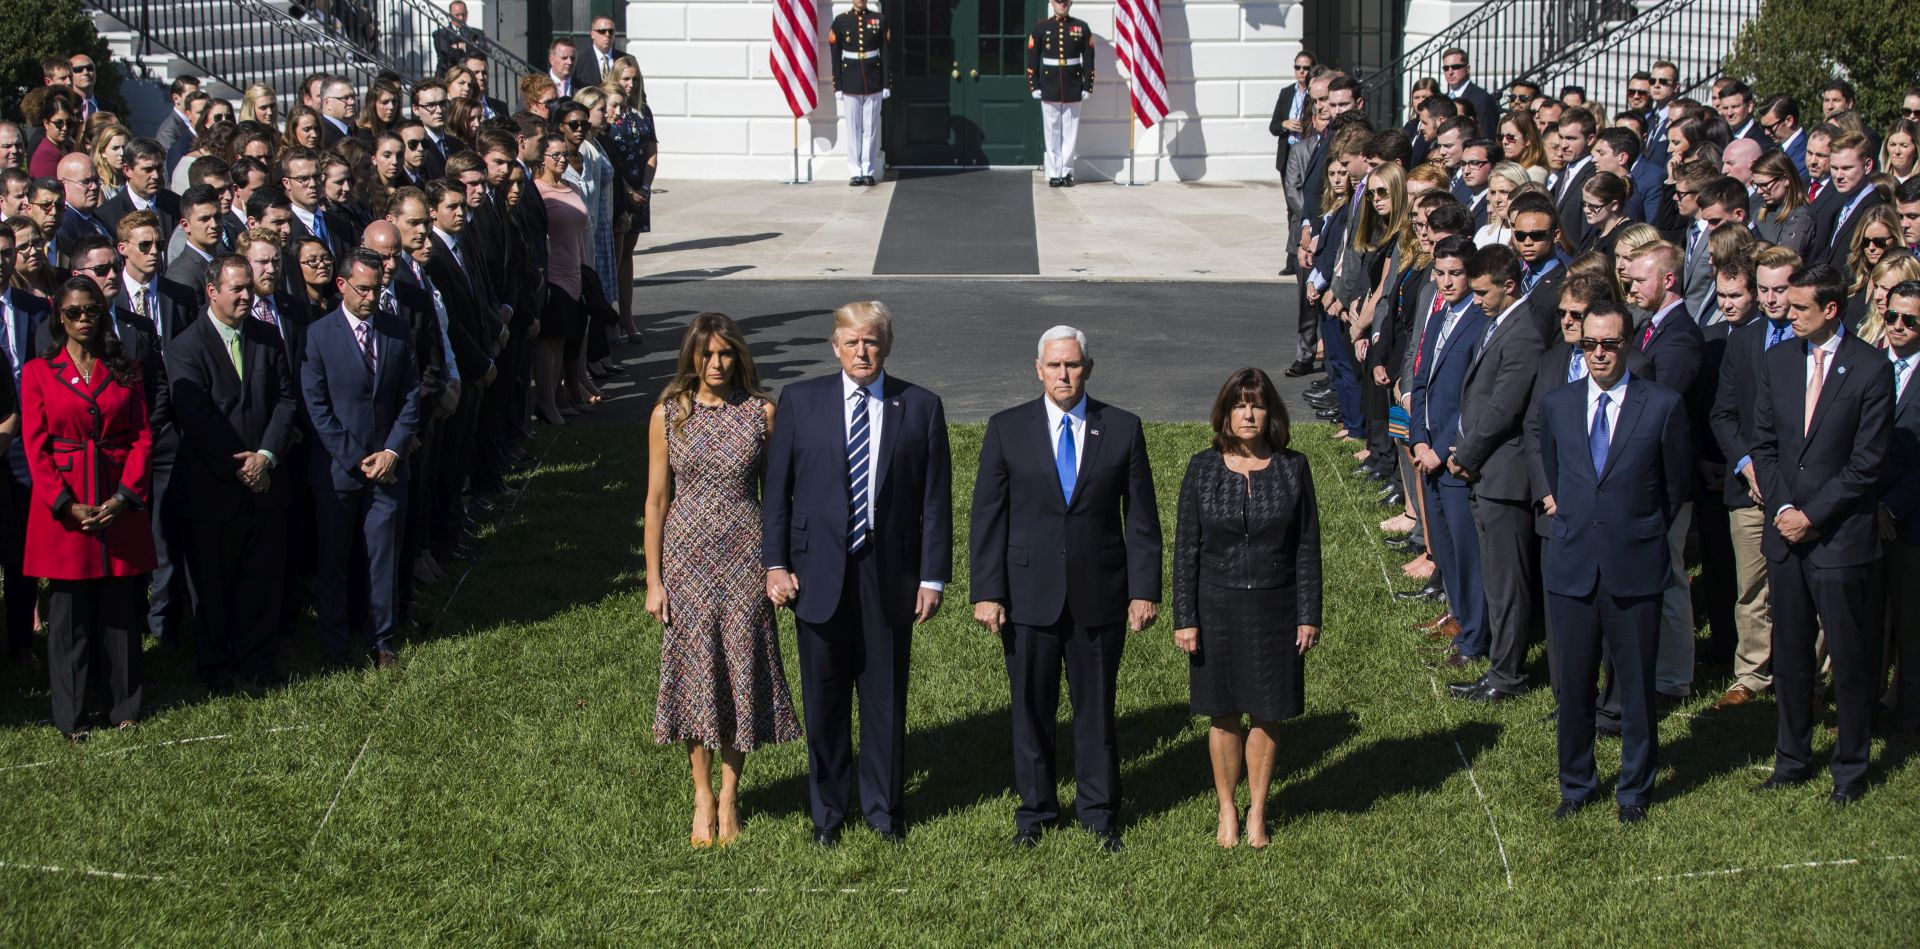 epa06240501 US President Donald J. Trump (C-L) and First Lady Melania Trump (L), along with Vice President Mike Pence (C-R) and and his wife Karen Pence (R), surrounded by staff, hold a moment of silence for the victims of the mass shooting in Las Vegas on the South Portico of the White House in Washington, DC, USA, 02 October 2017. The mass shooting, which left at least 58 people dead and more than 500 injured, is the largest in modern US history  EPA/JIM LO SCALZO